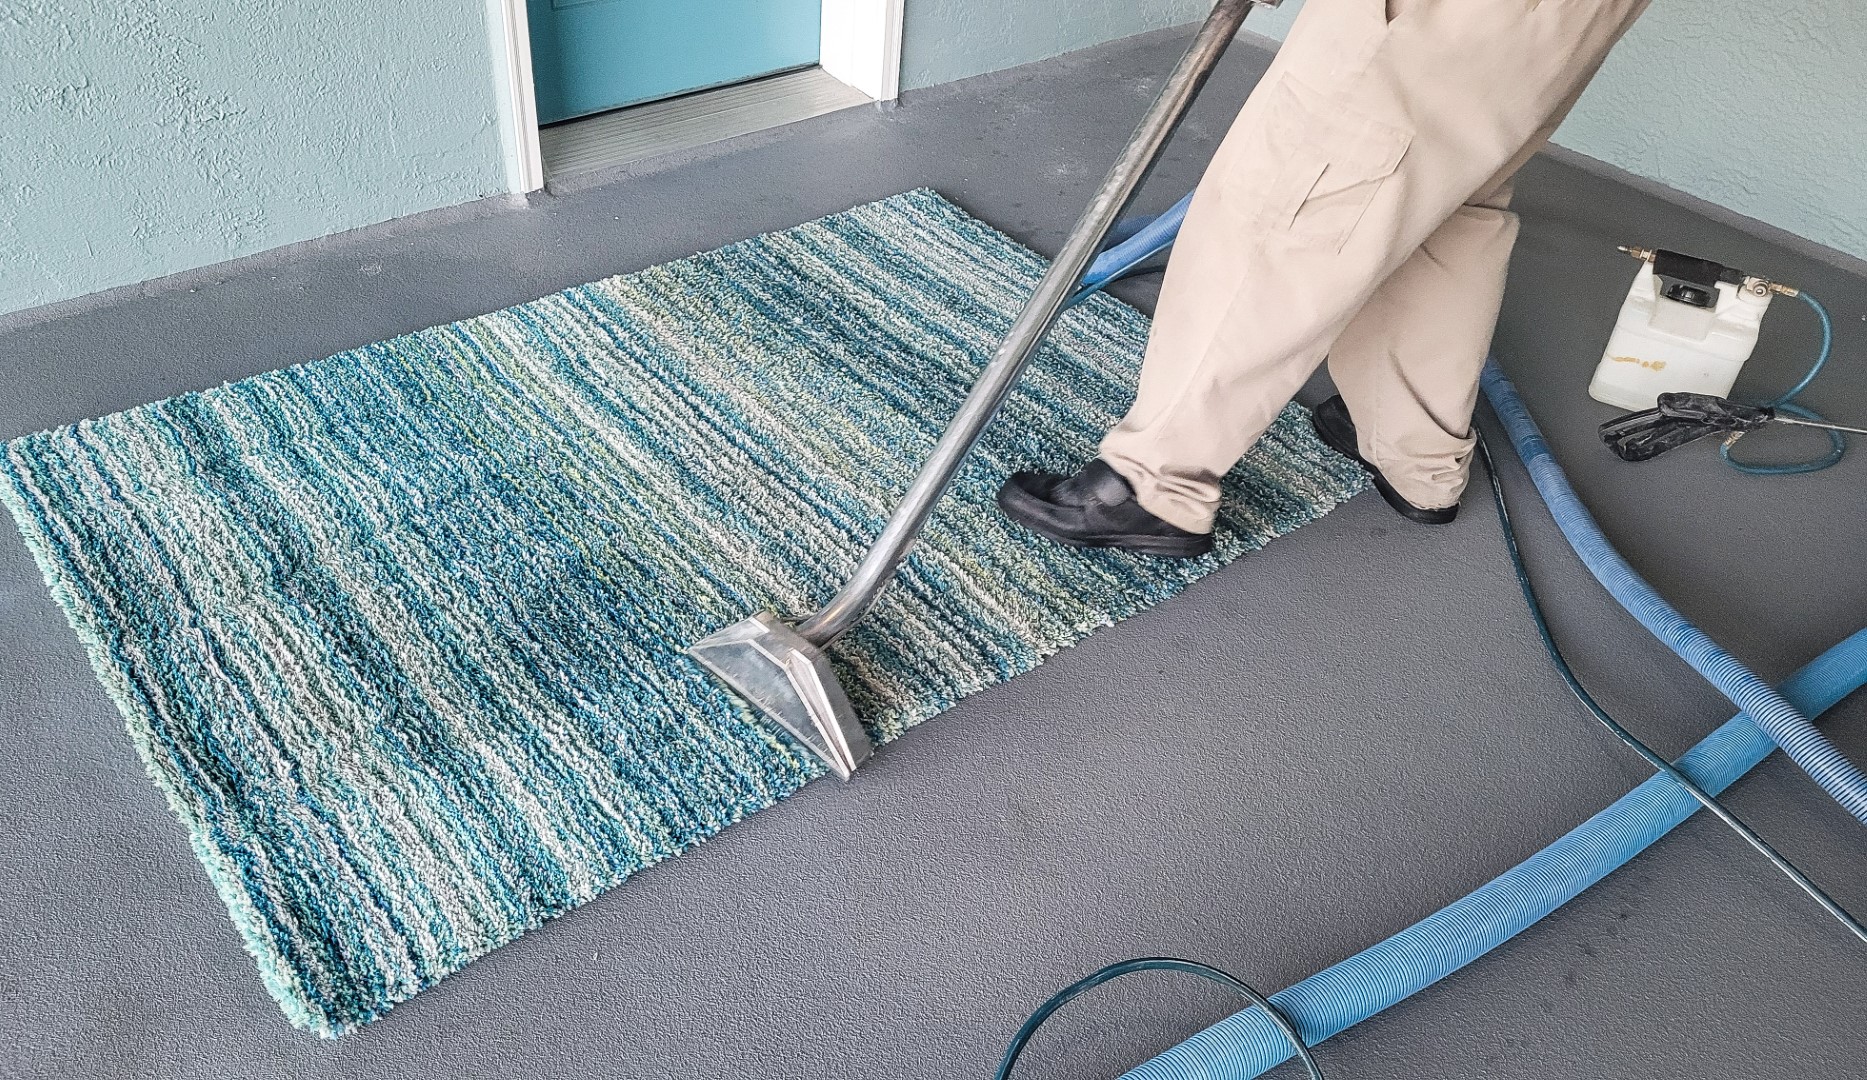 Man Has Small Business Cleaning Carpets By Shampoo 2022 11 12 10 43 26 Utc